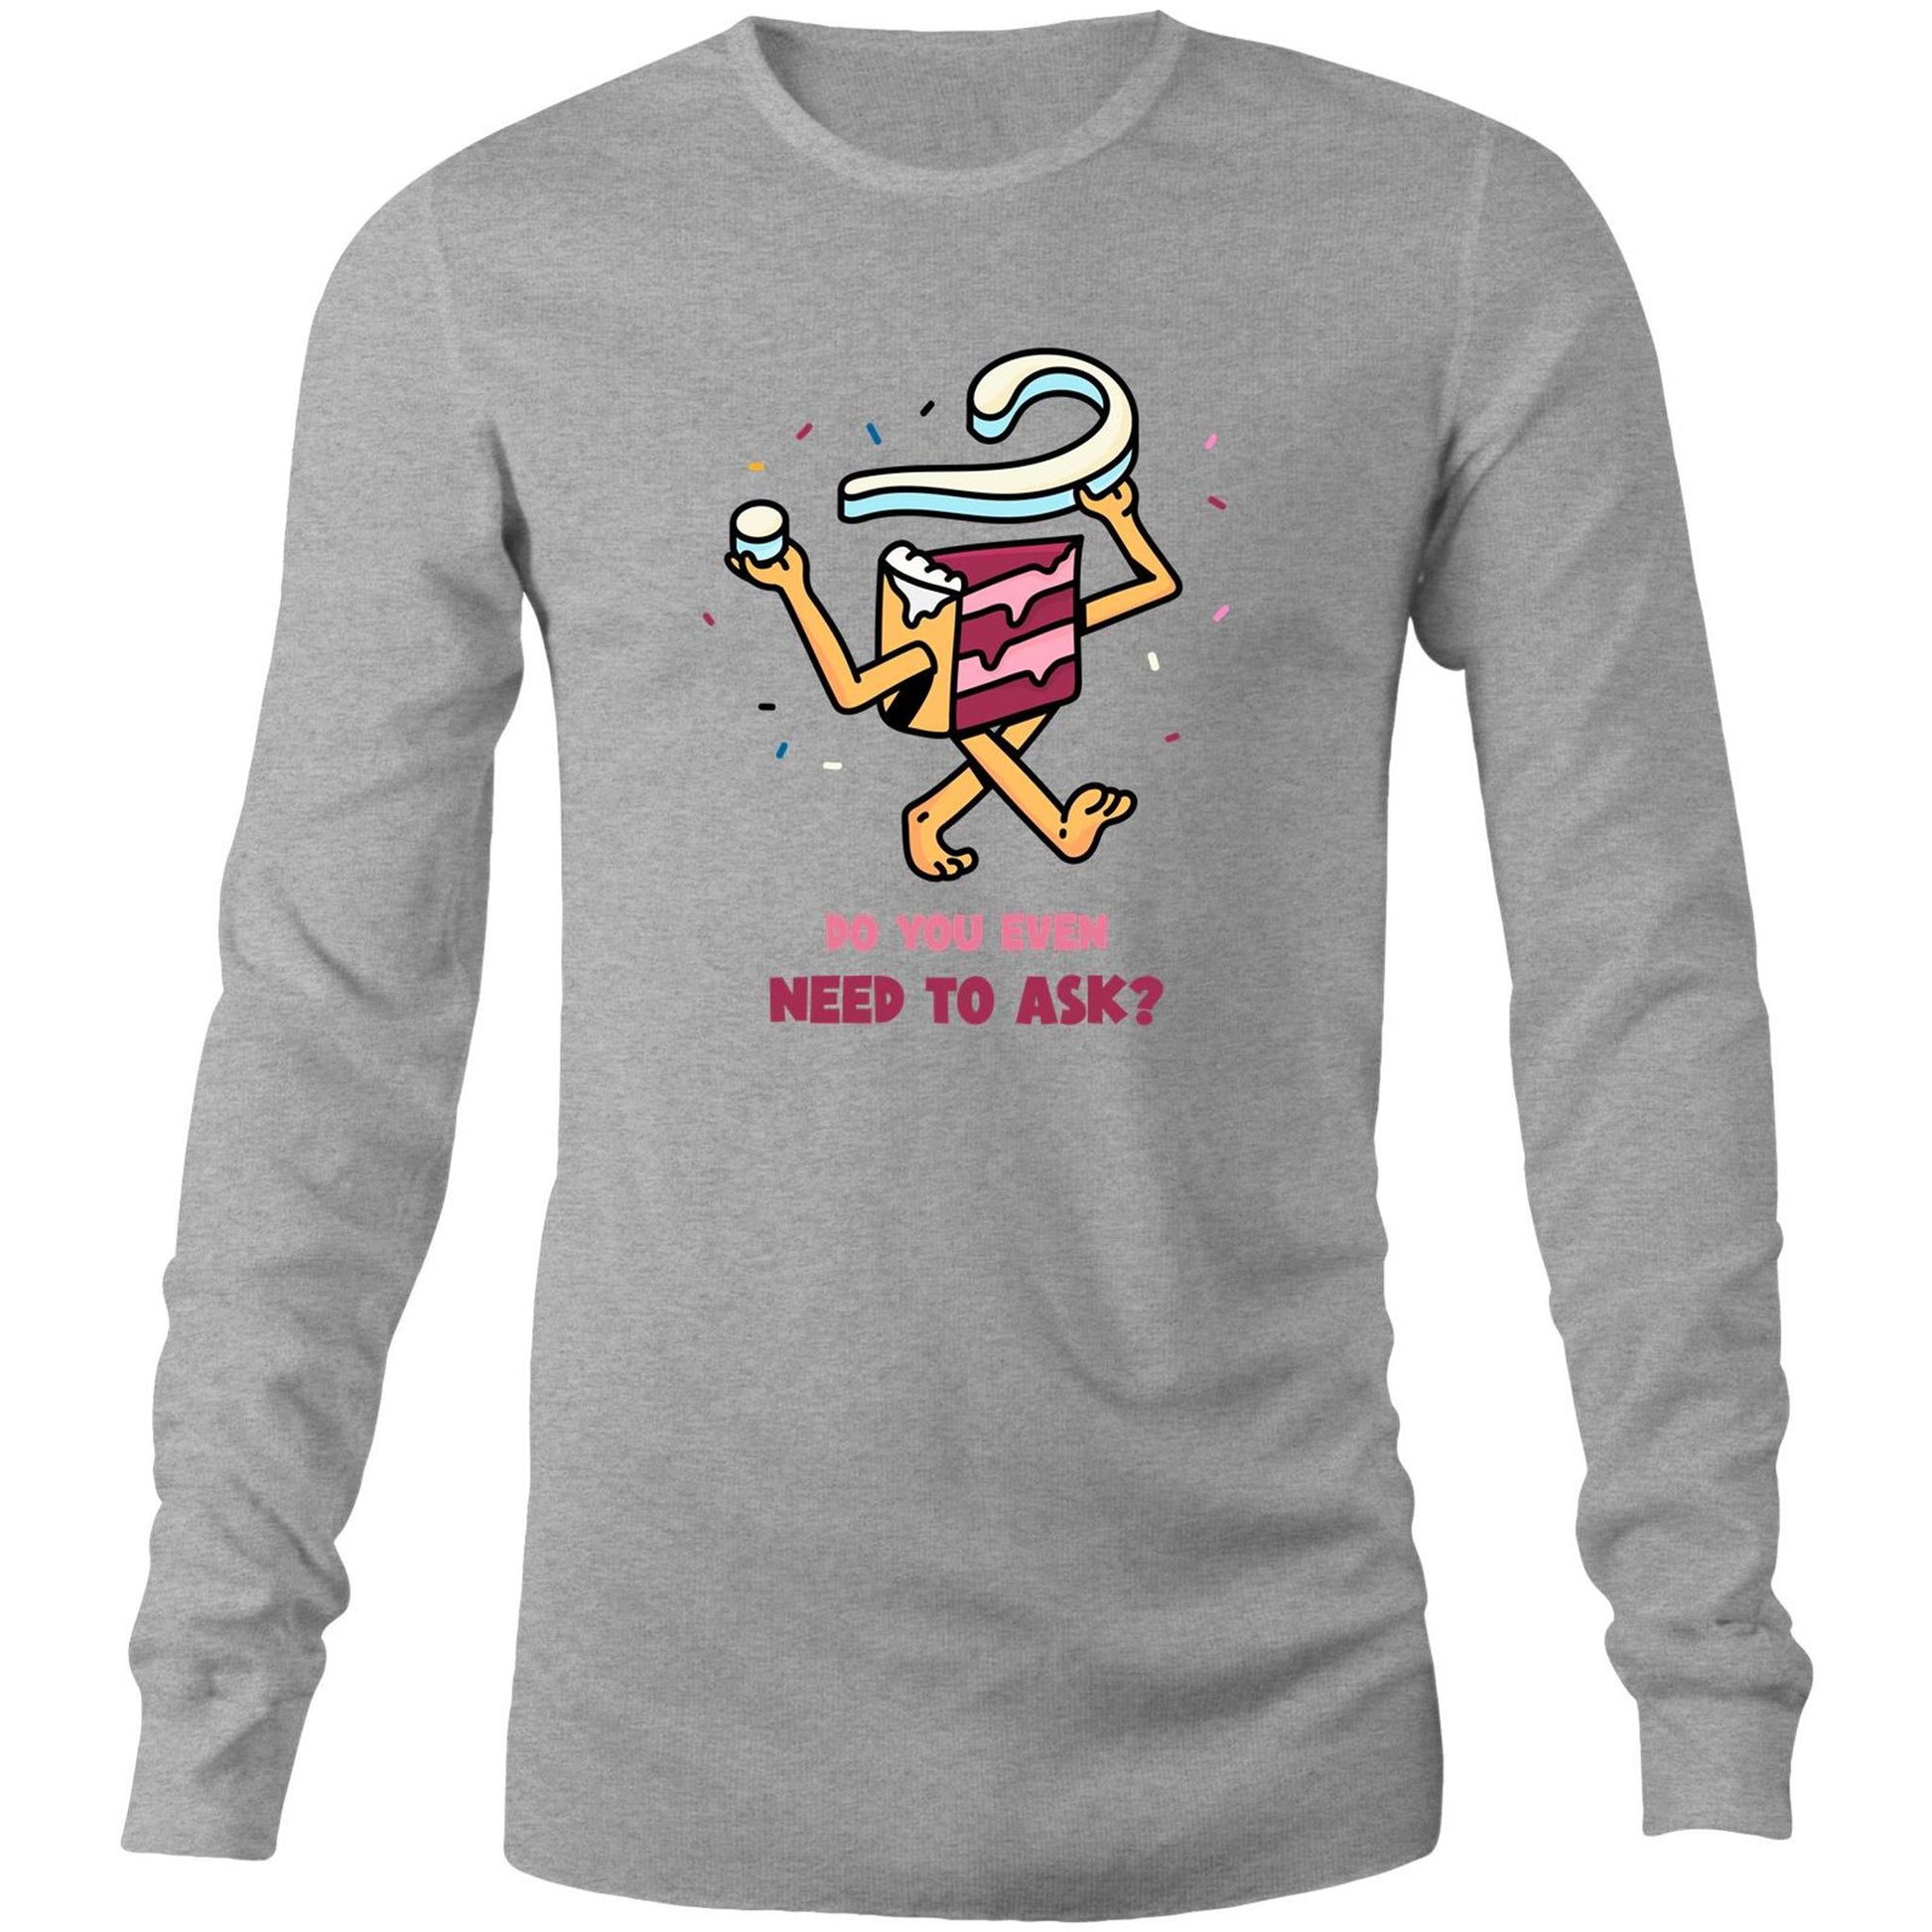 Cake, Do You Even Need To Ask - Long Sleeve T-Shirt Grey Marle Unisex Long Sleeve T-shirt